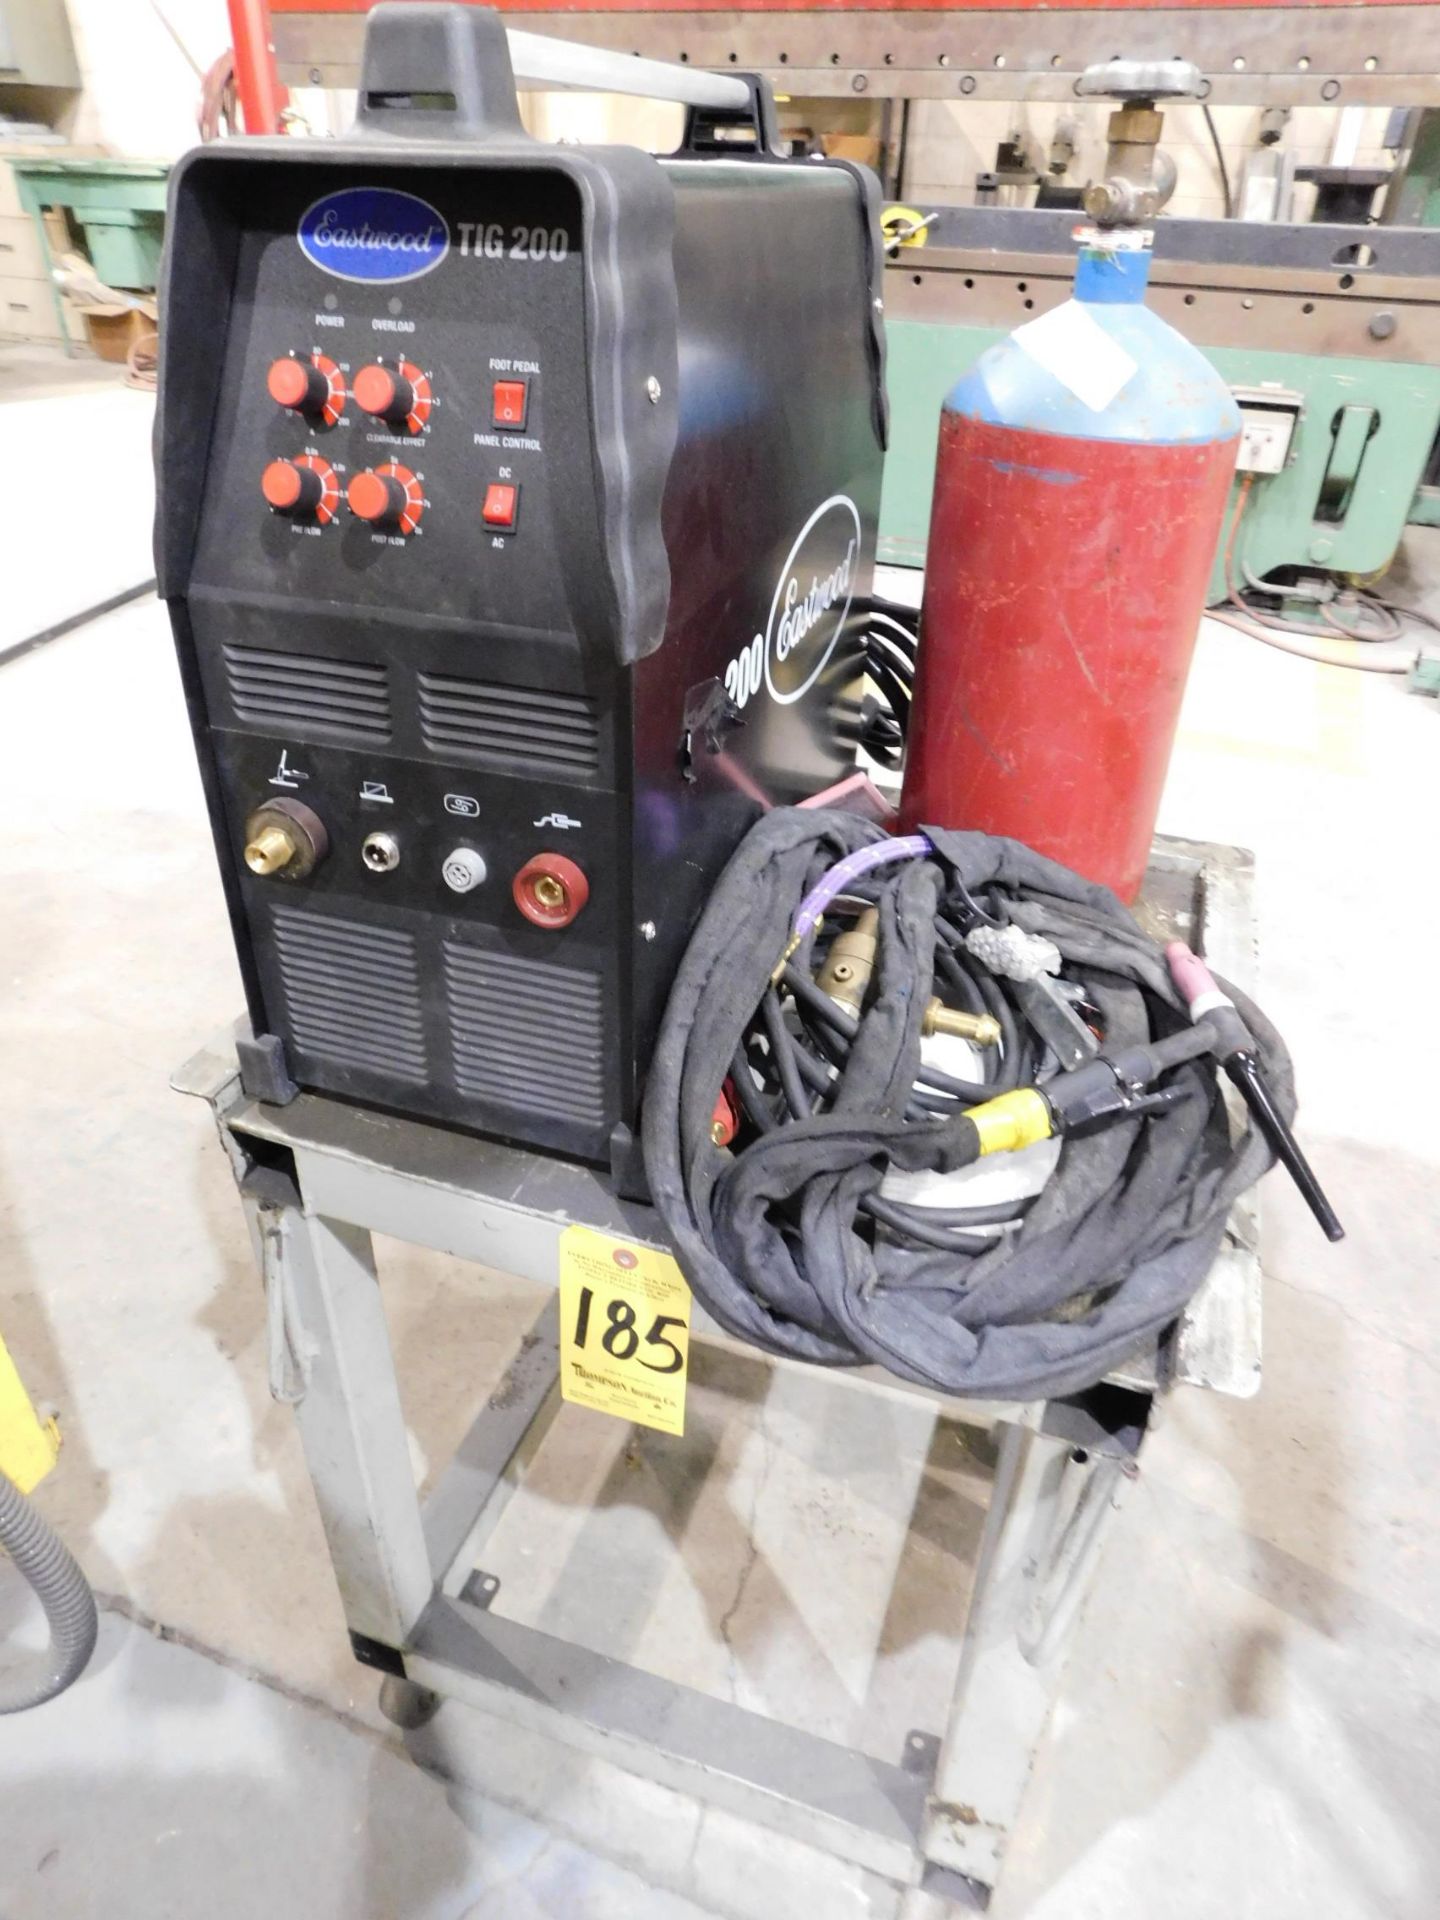 Eastwood TIG200 Portable Tig Welder, s/n 66103120303042, with Torch, Ground Cable, Foot Pedal